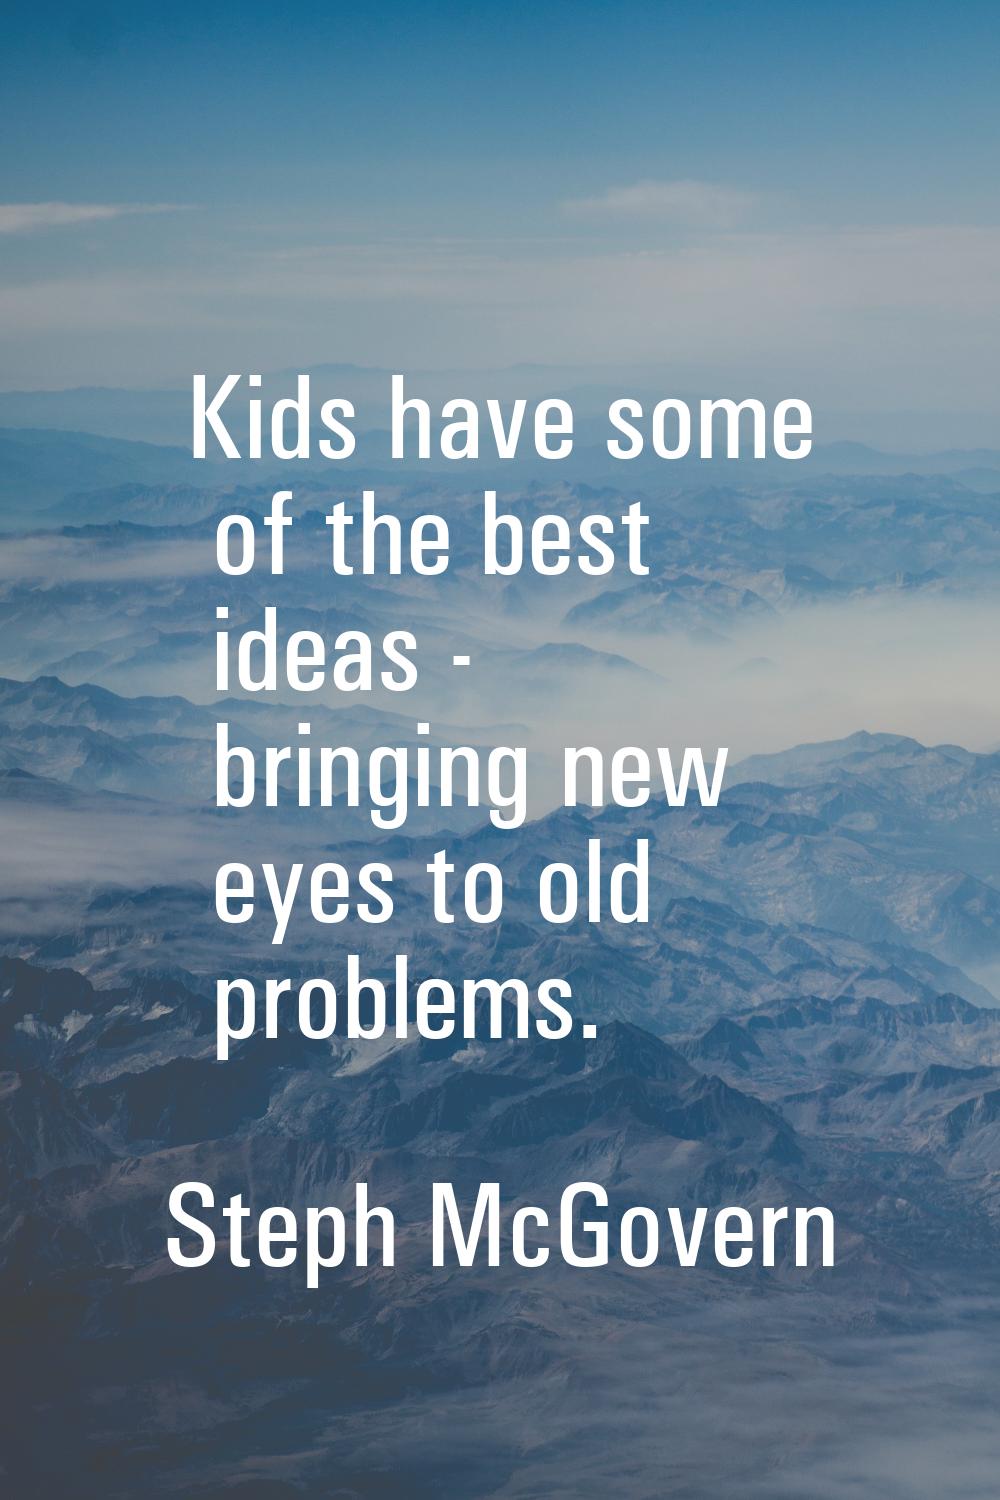 Kids have some of the best ideas - bringing new eyes to old problems.